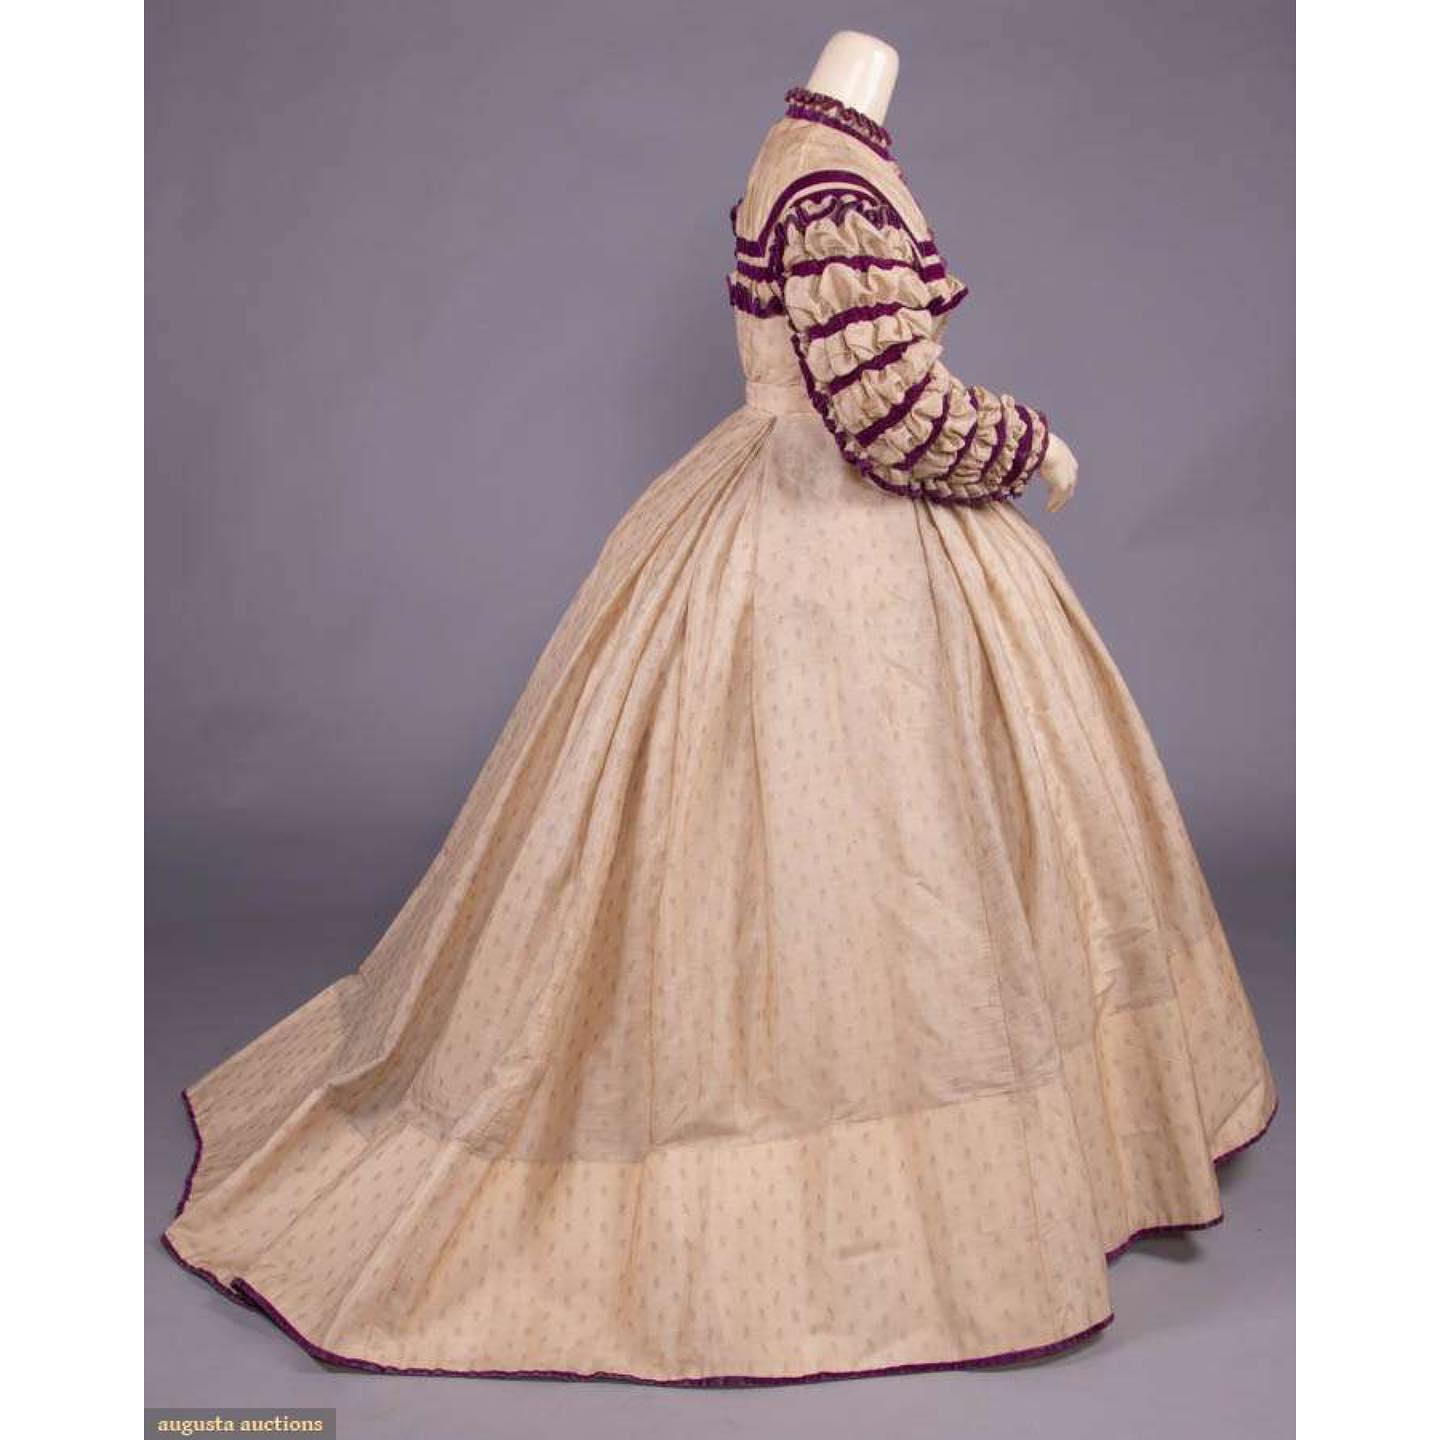 Day dress of figured barege trimmed in purple silk velvet ribbon, 1866-1867, sold by Augusta Auctions, Feb 2021